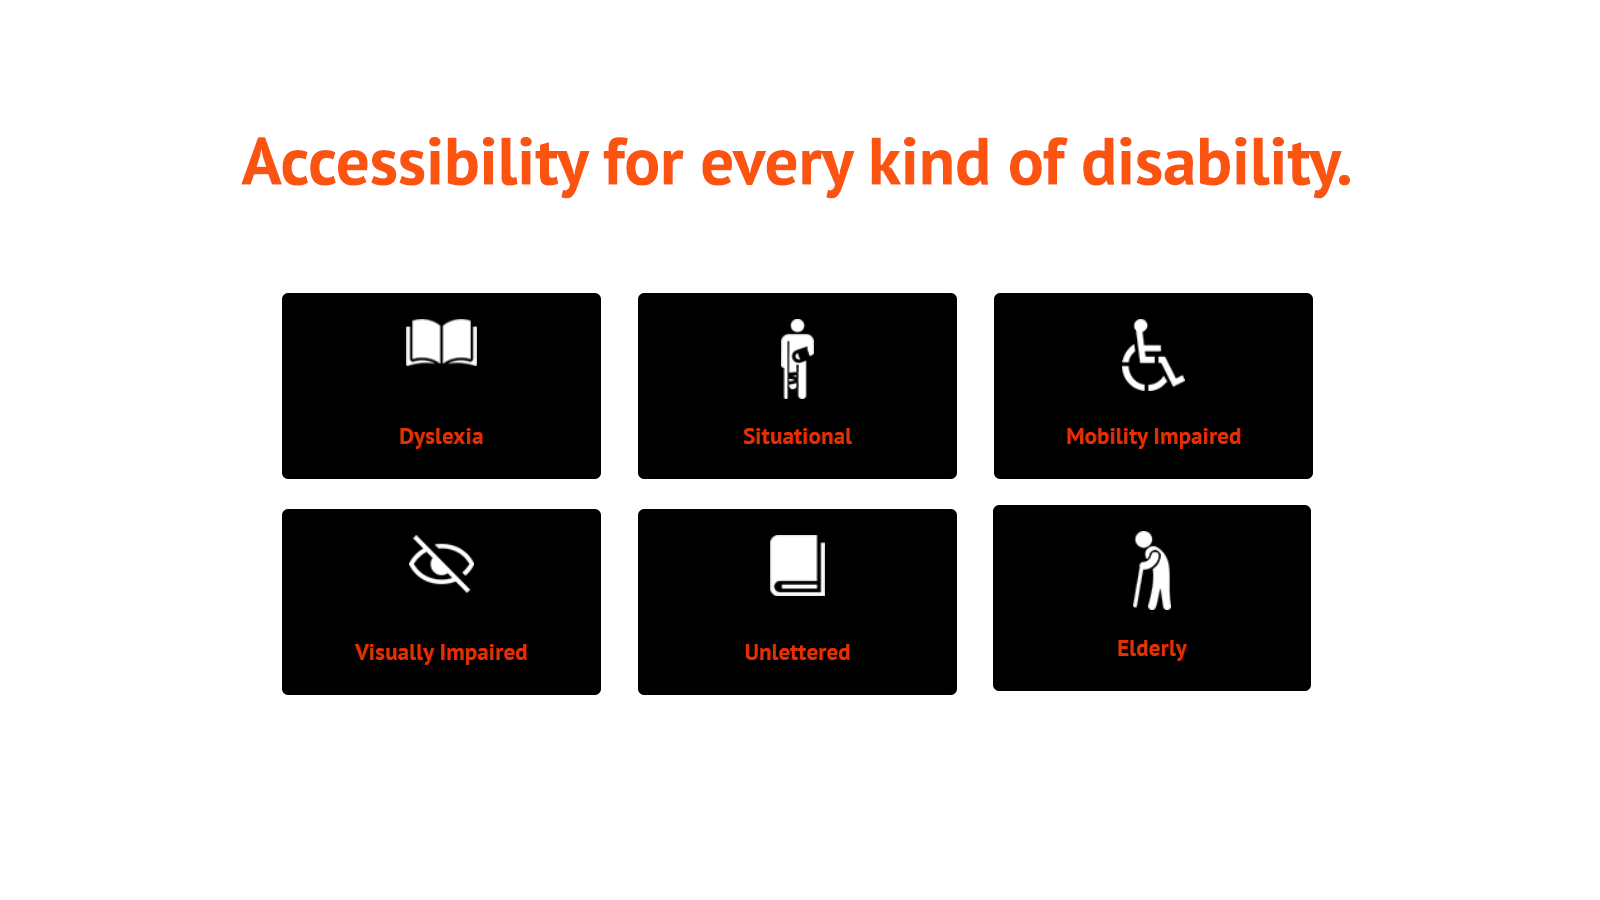 Disabilities Covered